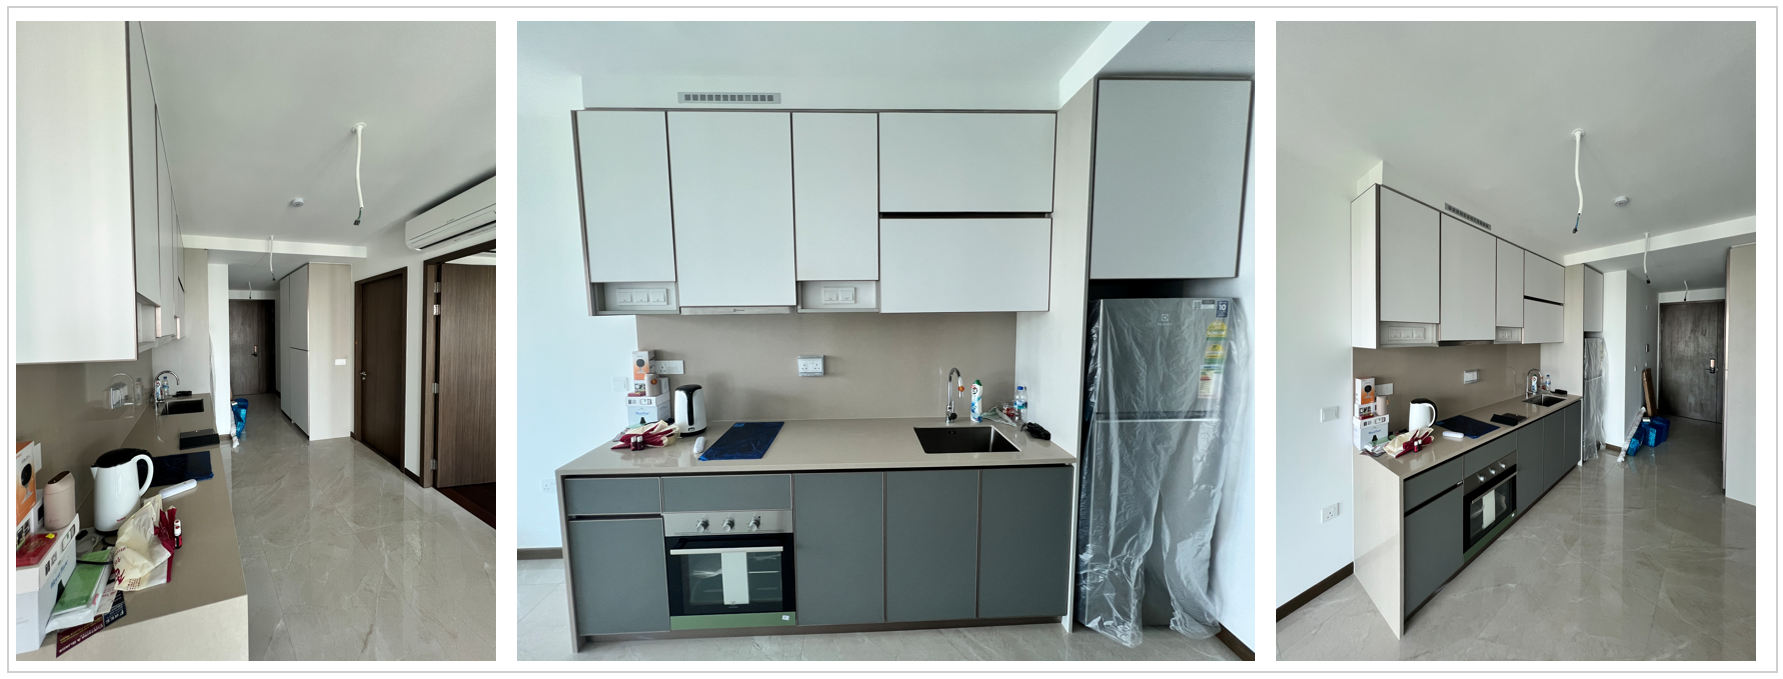 before renovation of modular cabinet images